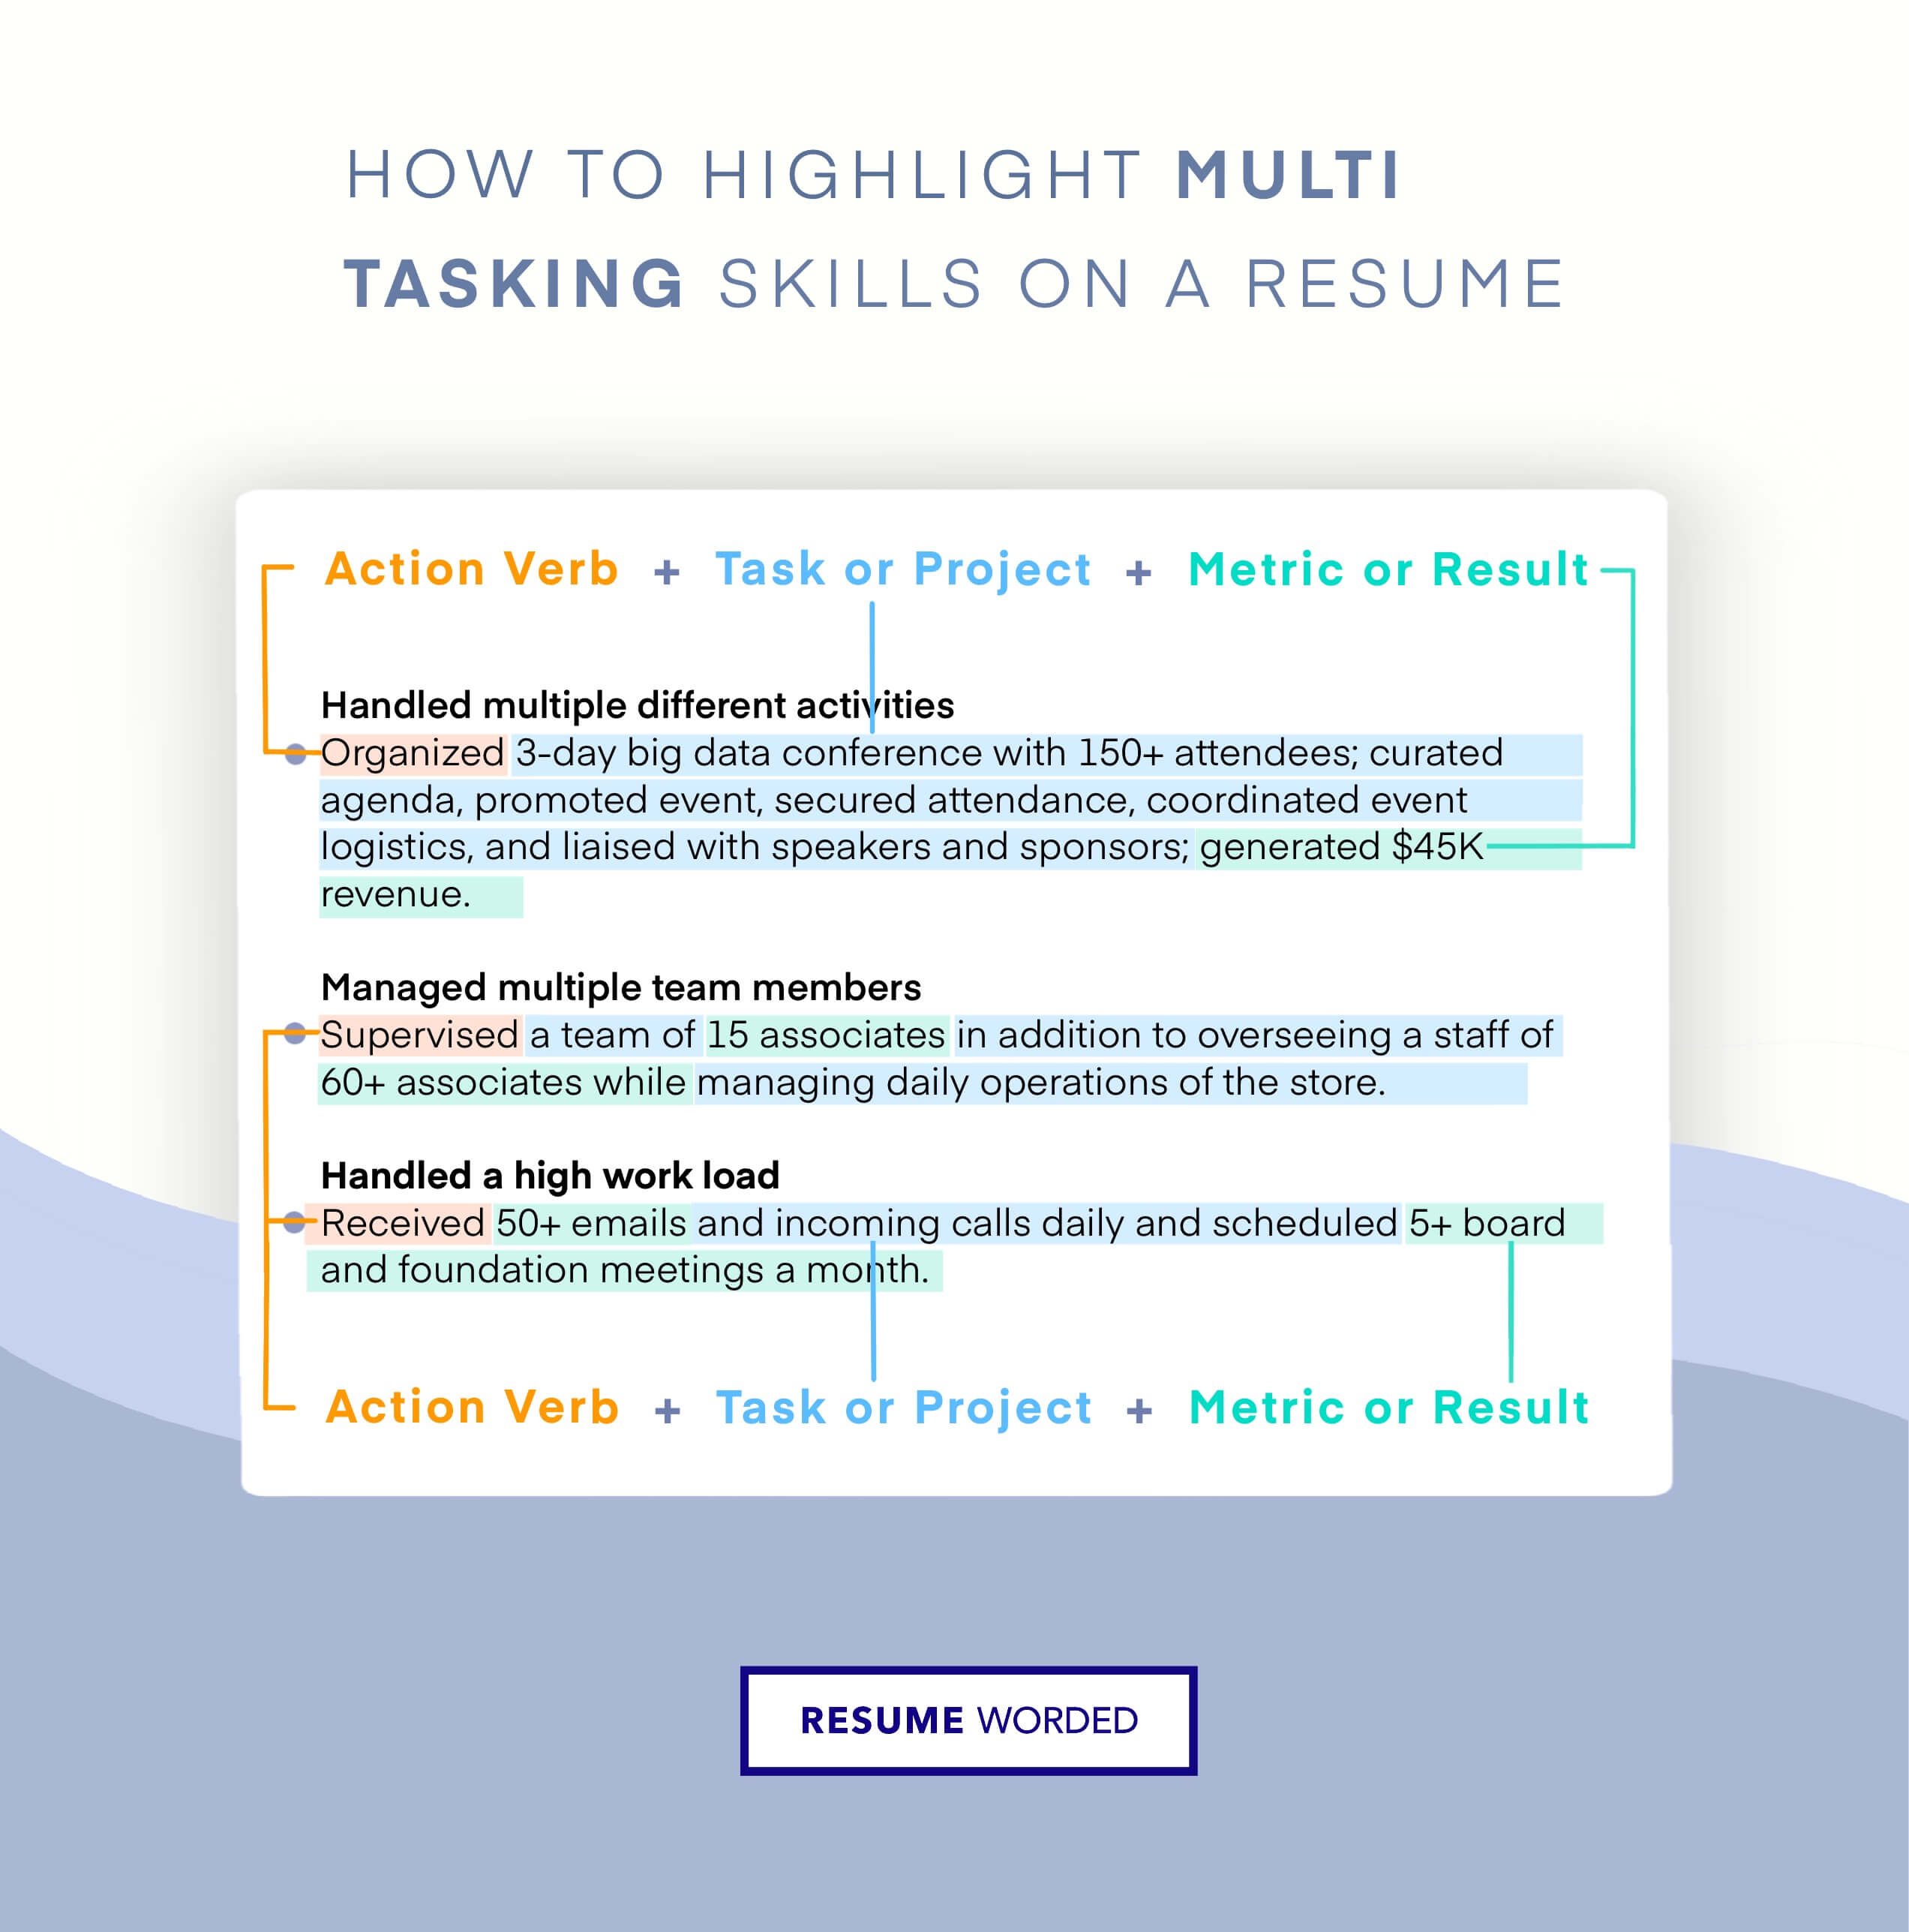 The Right Way To Show Skills on Resume